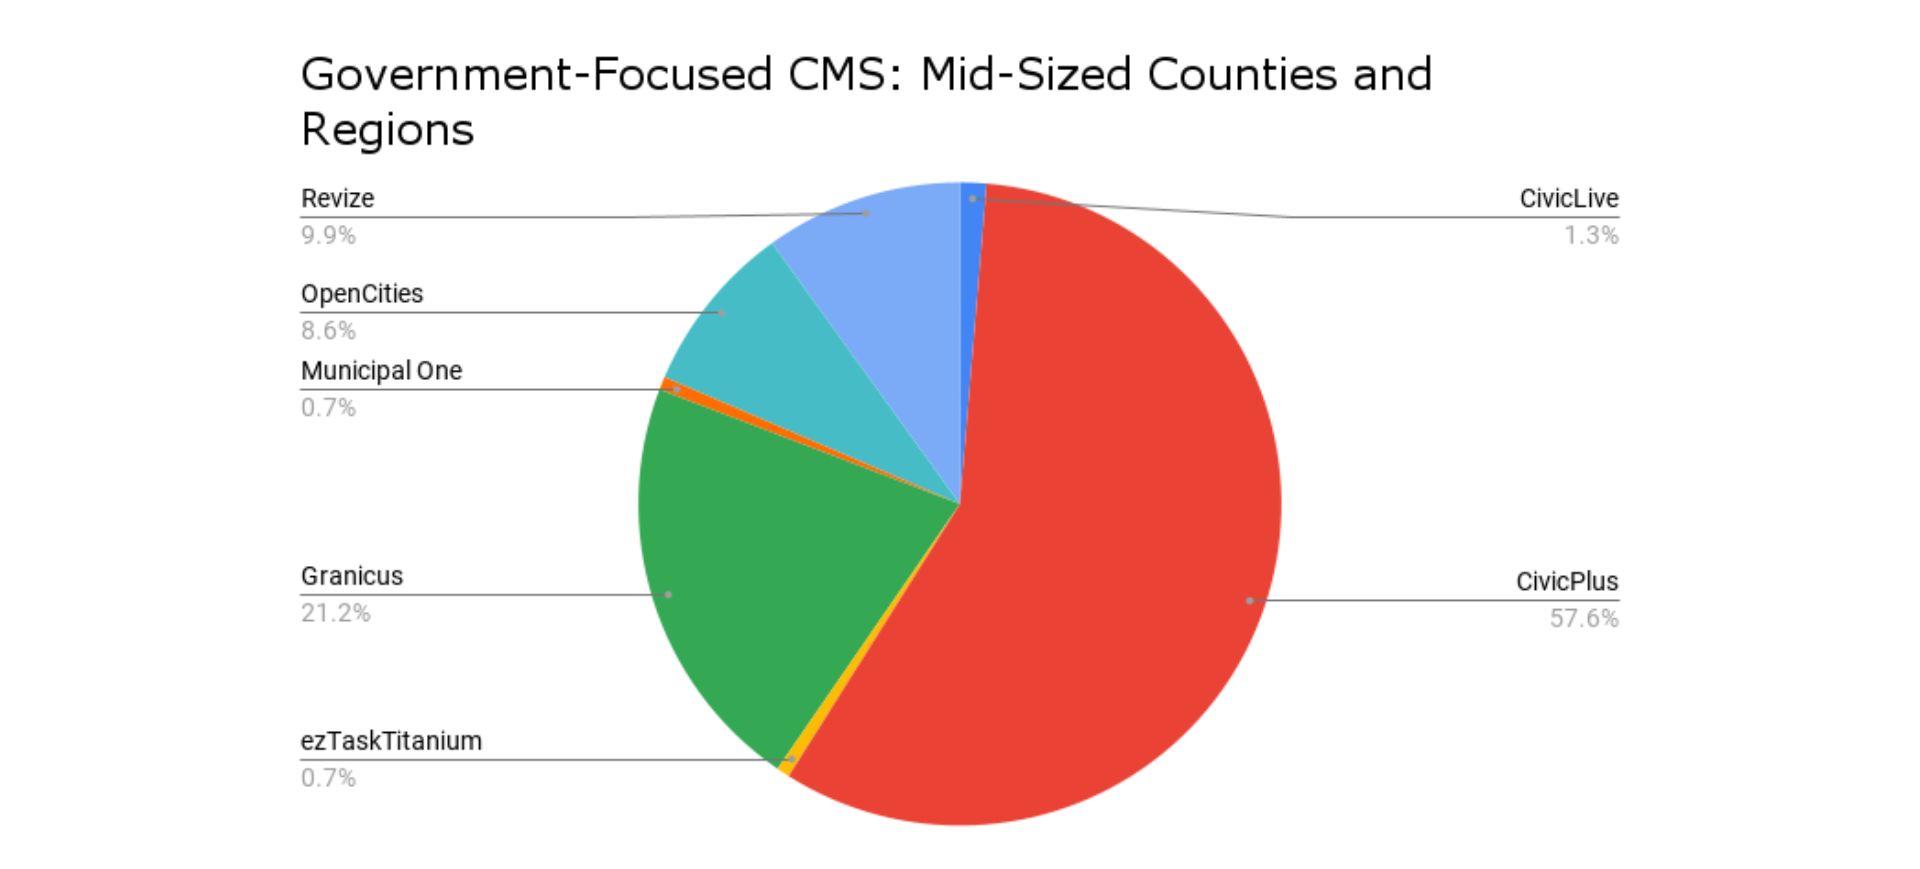 government-focused cms: midsized counties